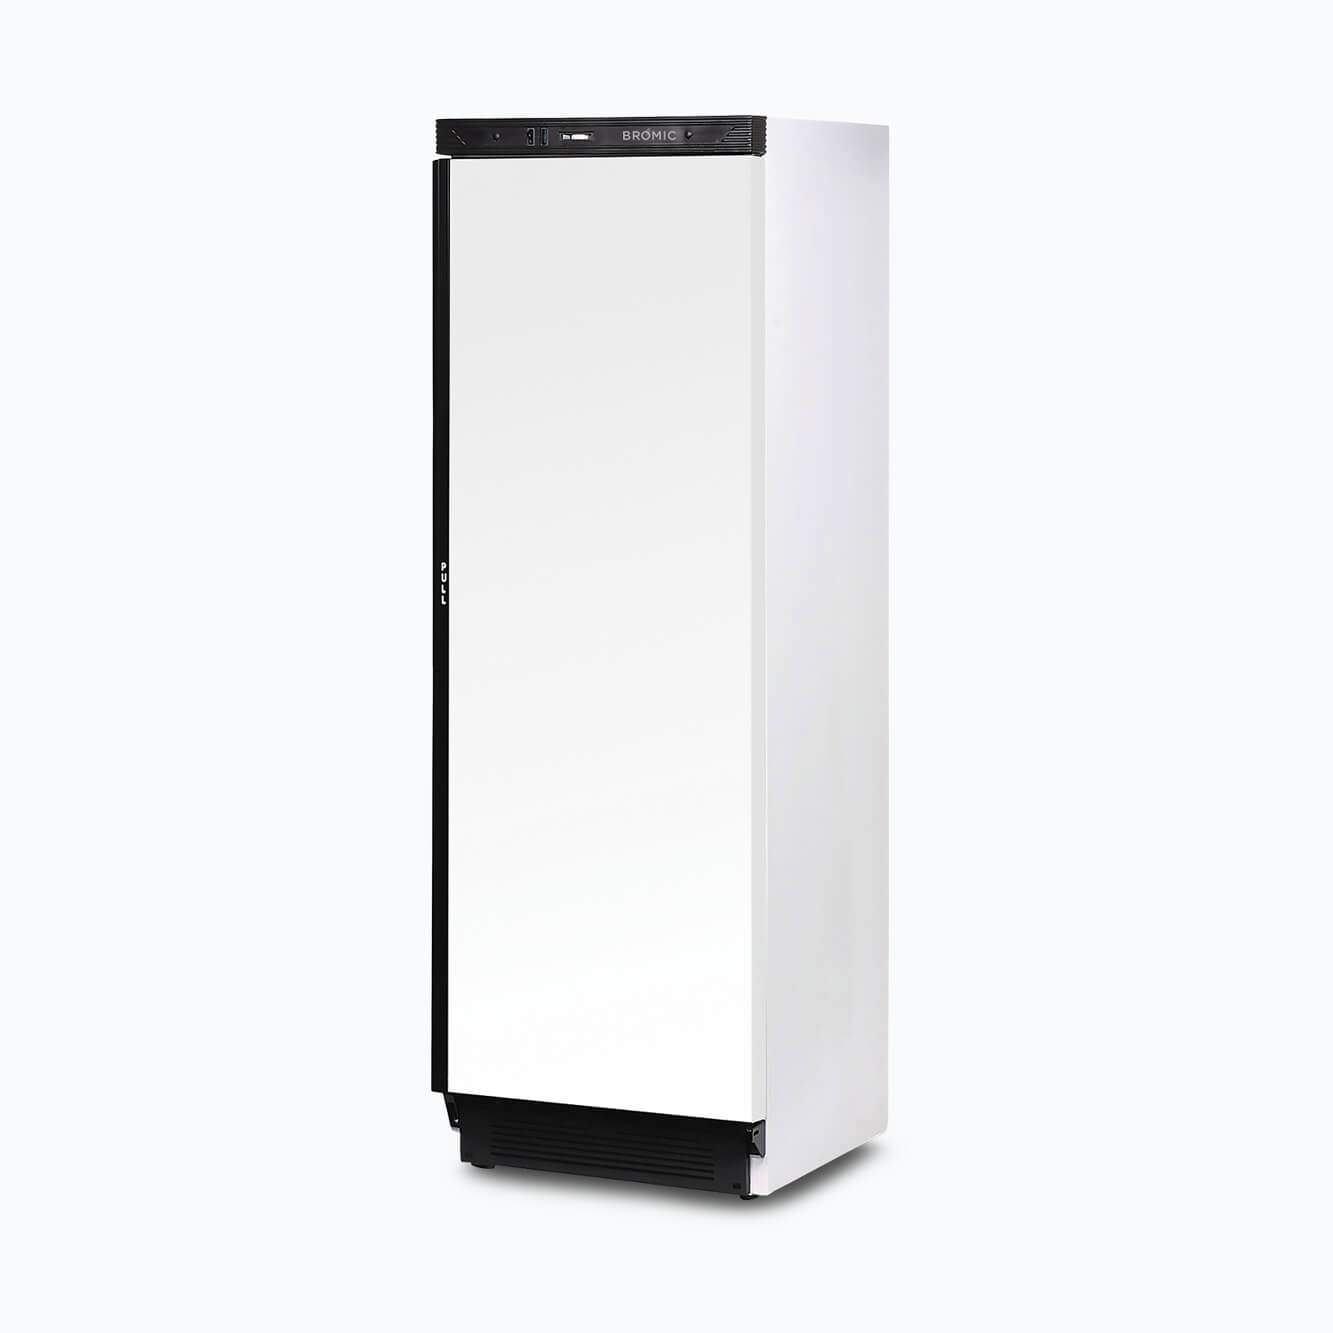 Image of a 372L white upright storage fridge with one door, right angled view.